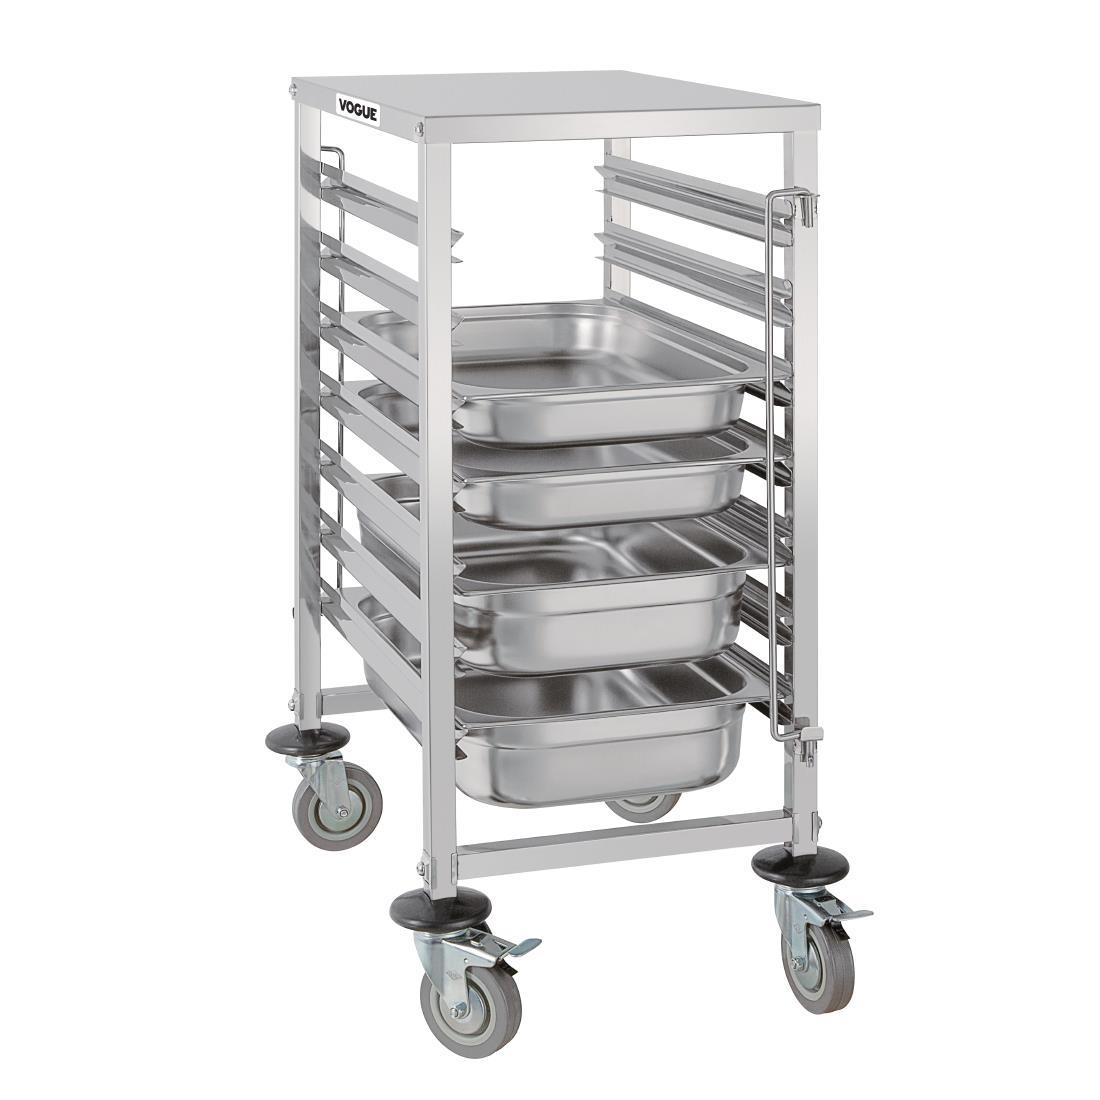 Vogue Gastronorm Racking Trolley 7 Level - GG498  - 2